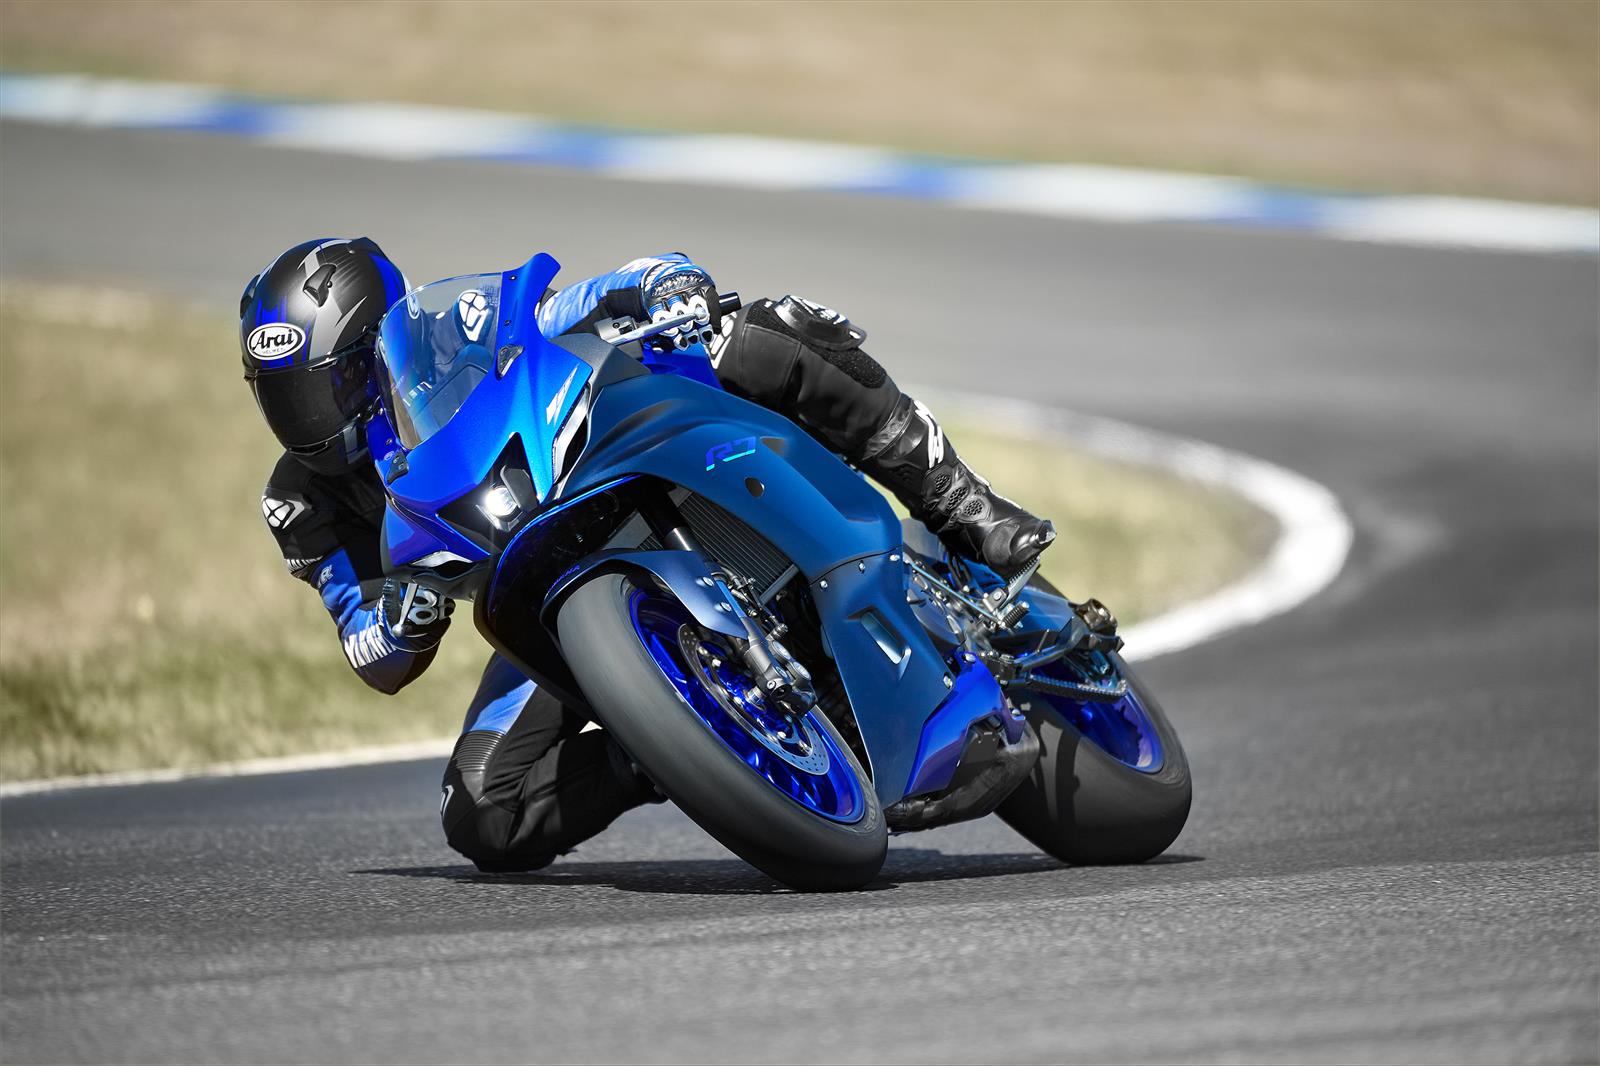 2022 Yamaha YZF R7: Specs, Features, and price - TAB Report